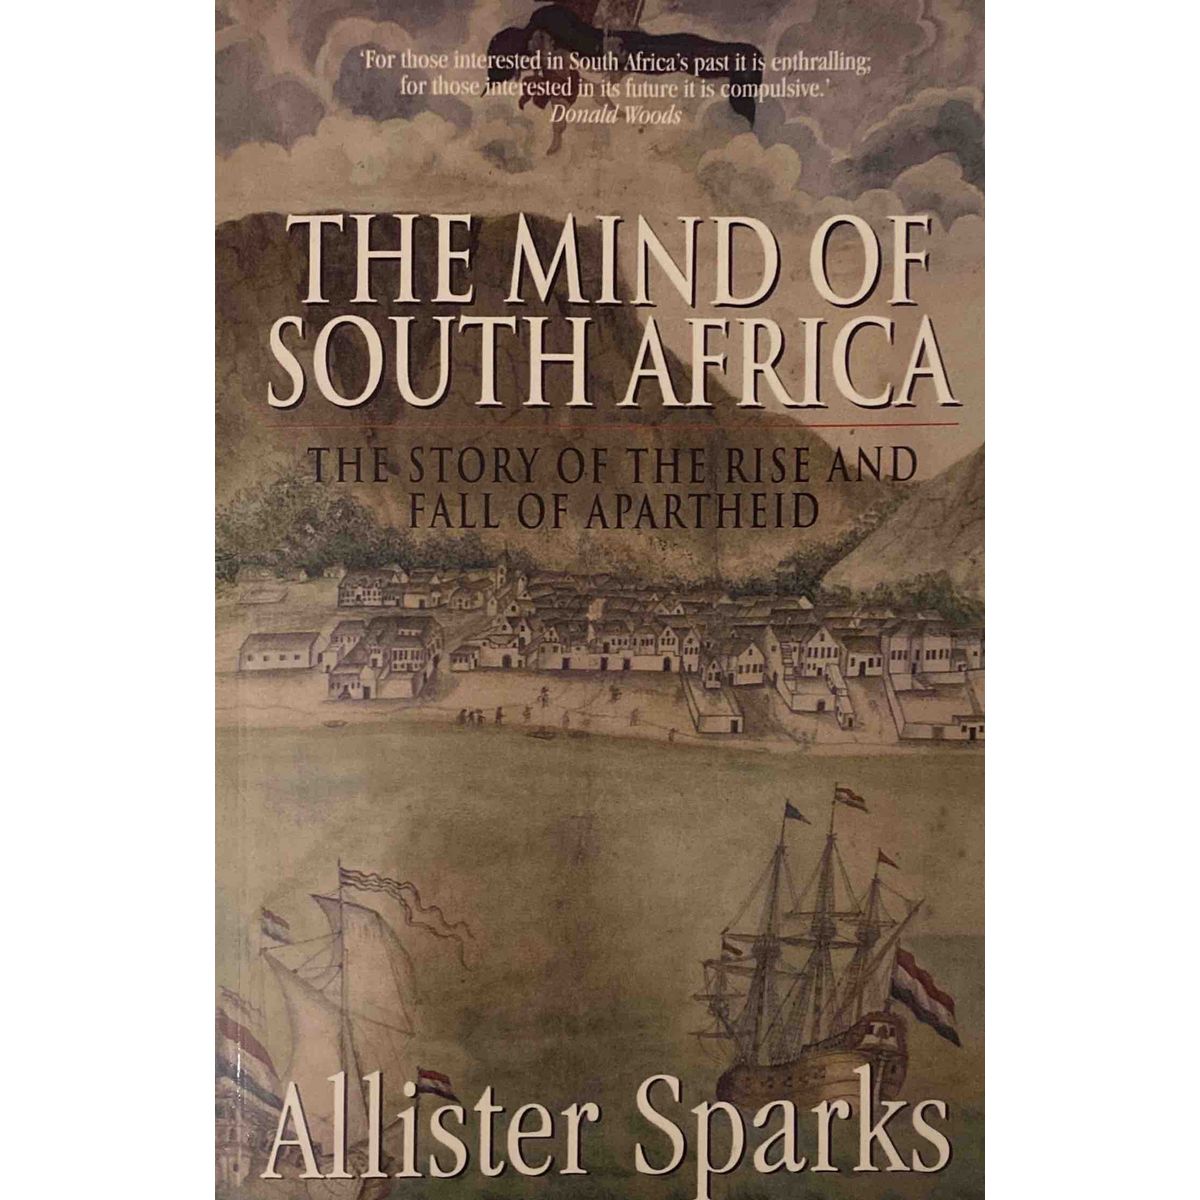 ISBN: 9781868421879 / 1868421872 - The Mind of South Africa: The Story of the Rise and Fall of Apartheid by Allister Sparks [2011]